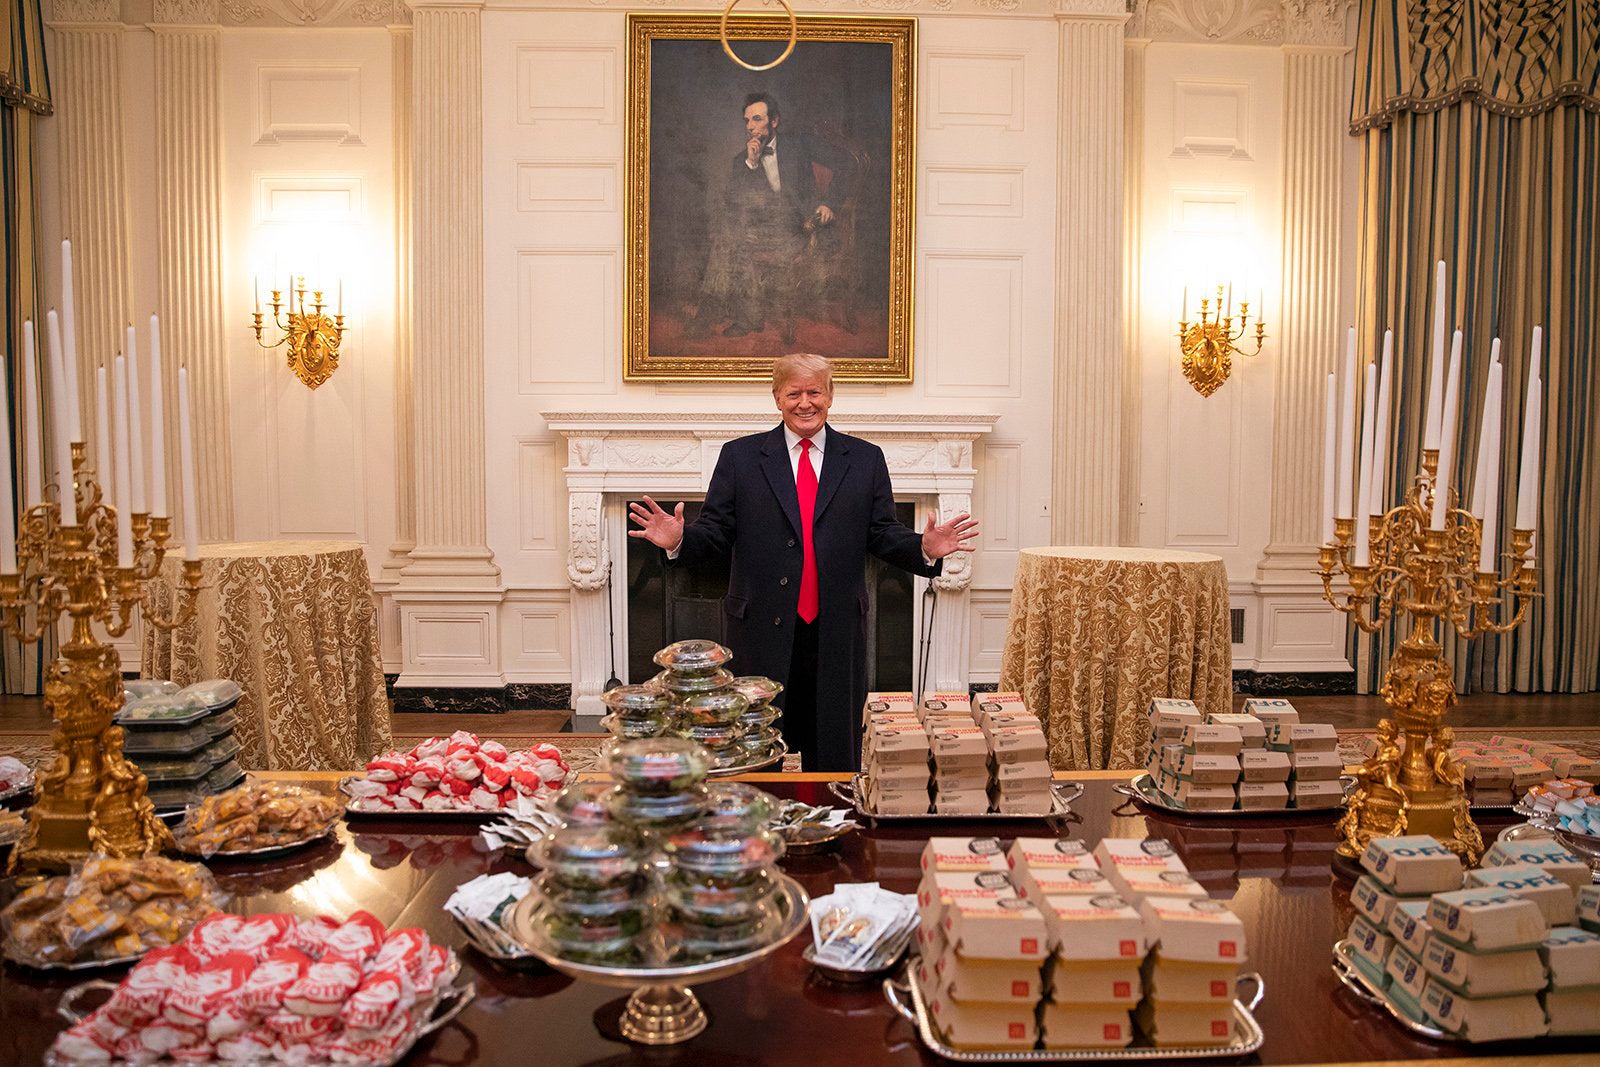 Donald Trump presides over a banquet table overflowing with fast food.